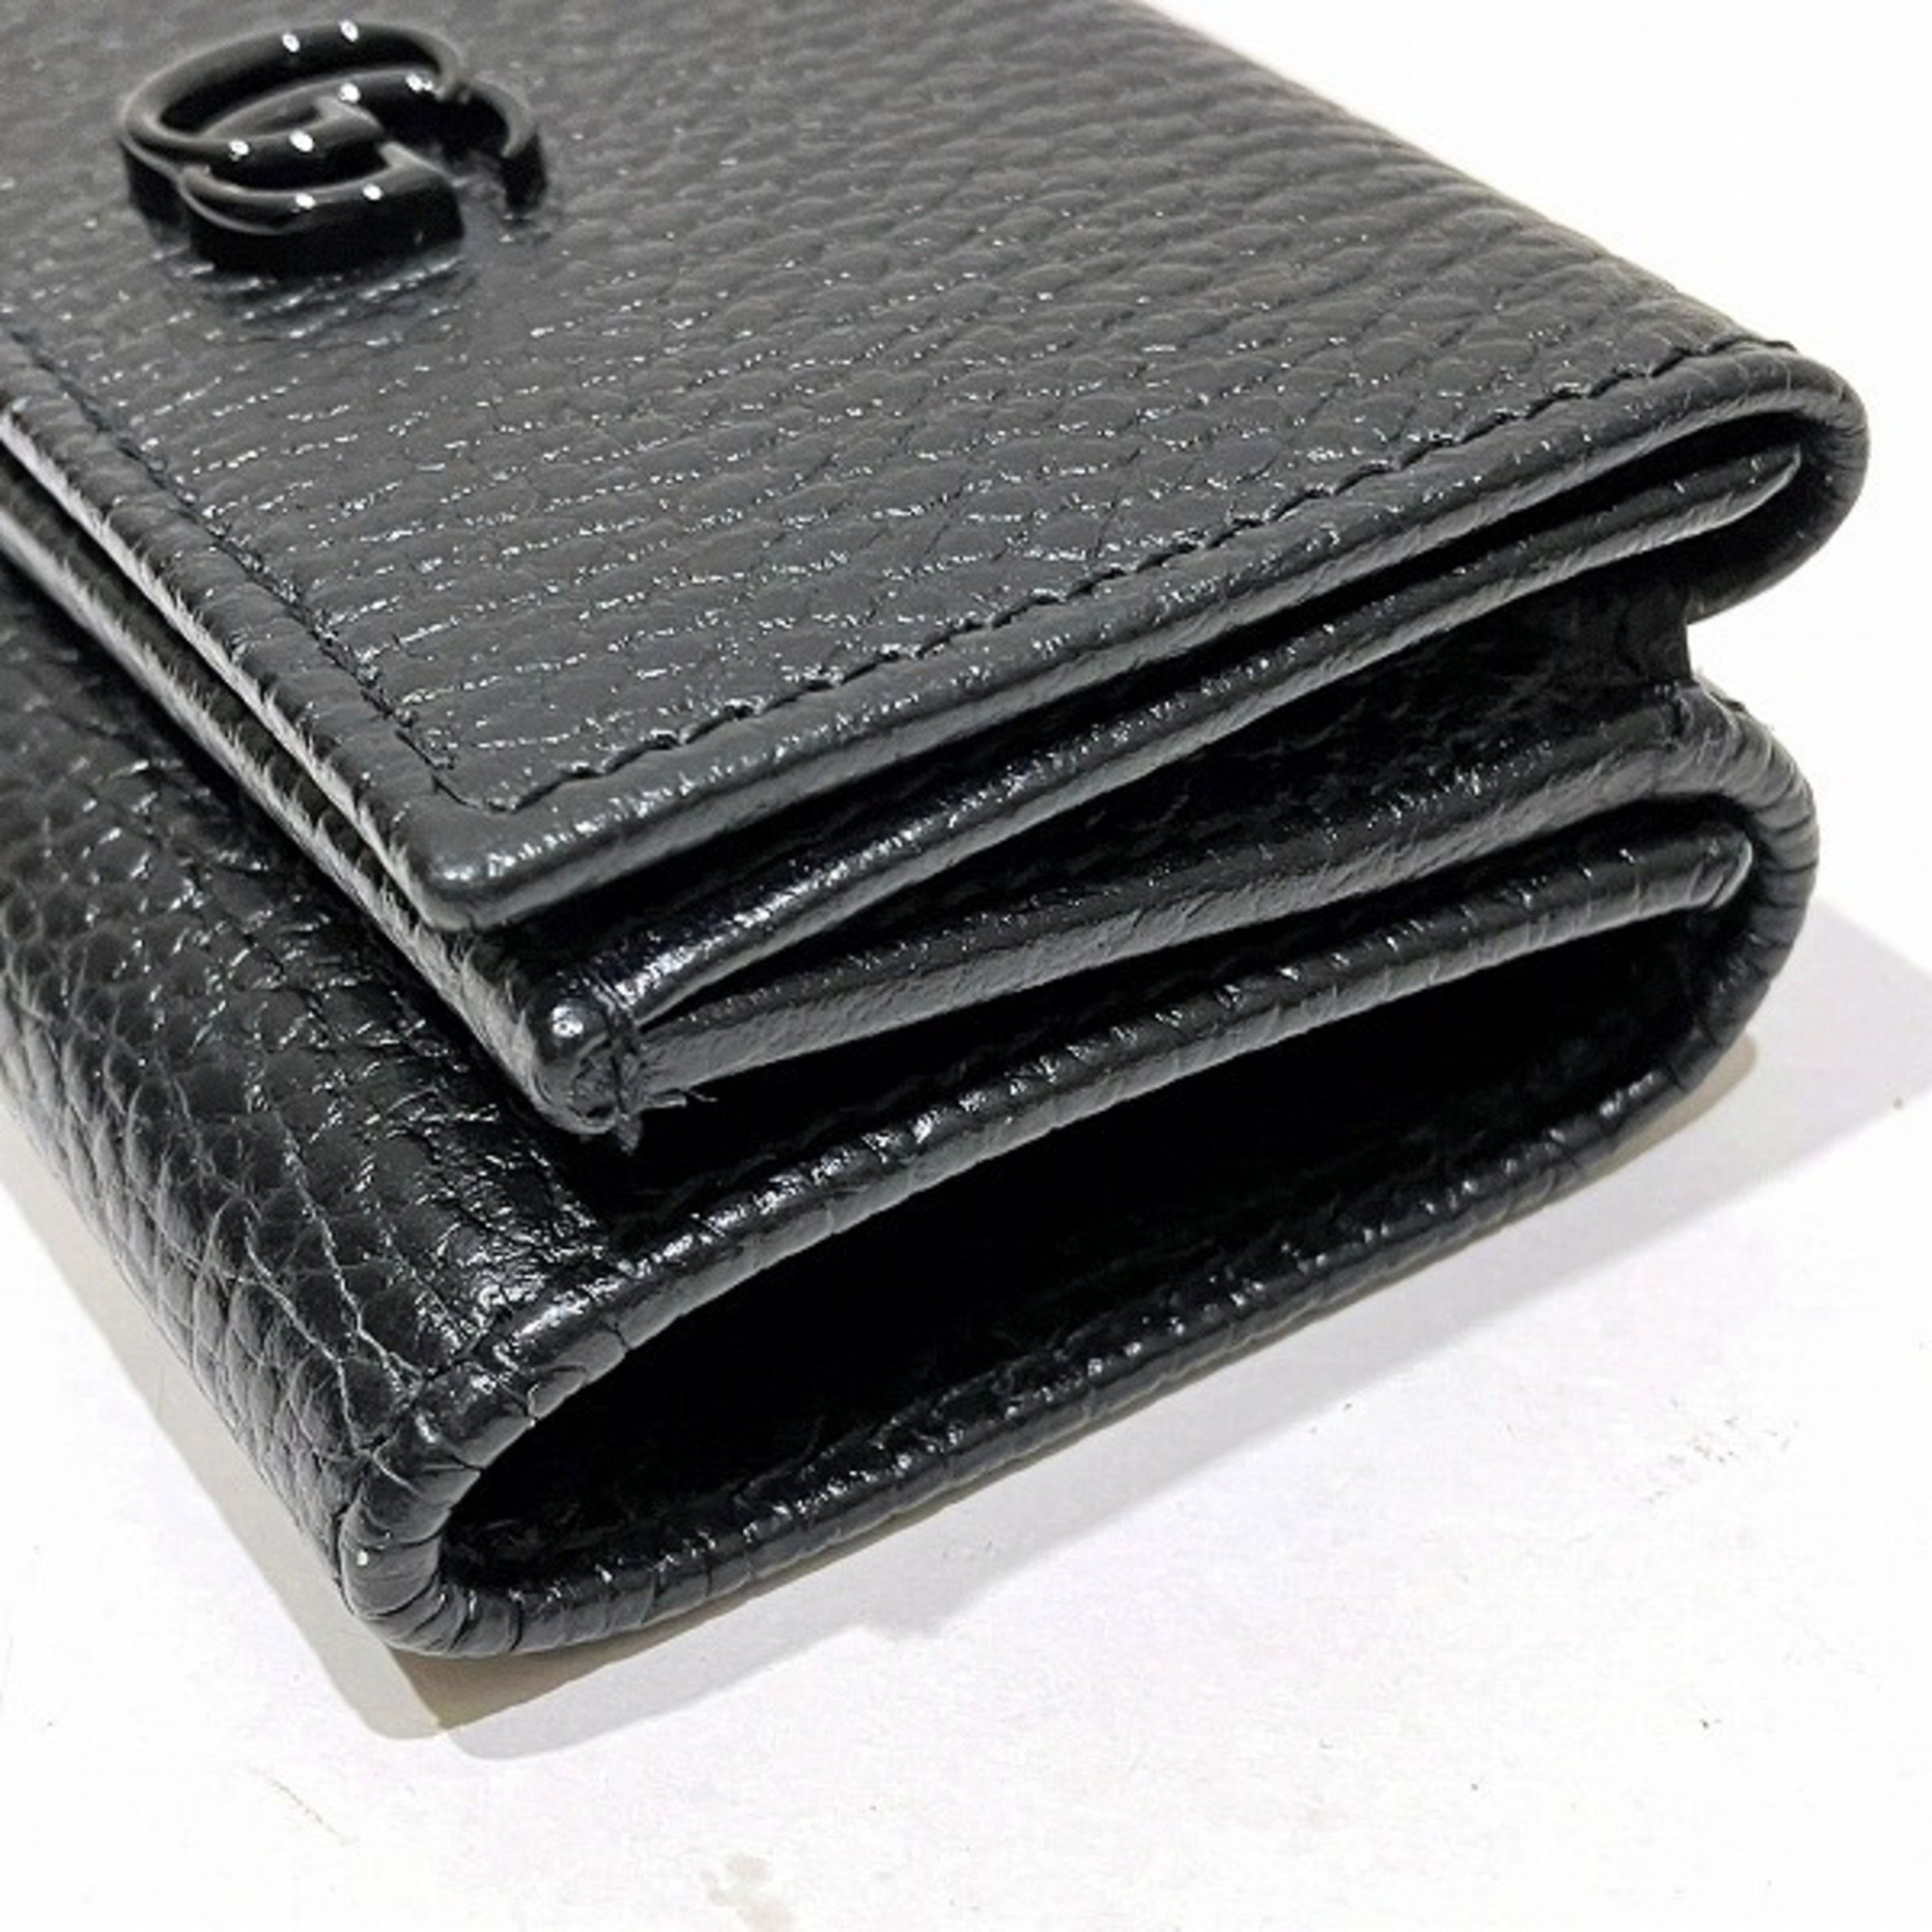 GUCCI Double G Wallet 735212 17WEF 1000 Trifold Ladies